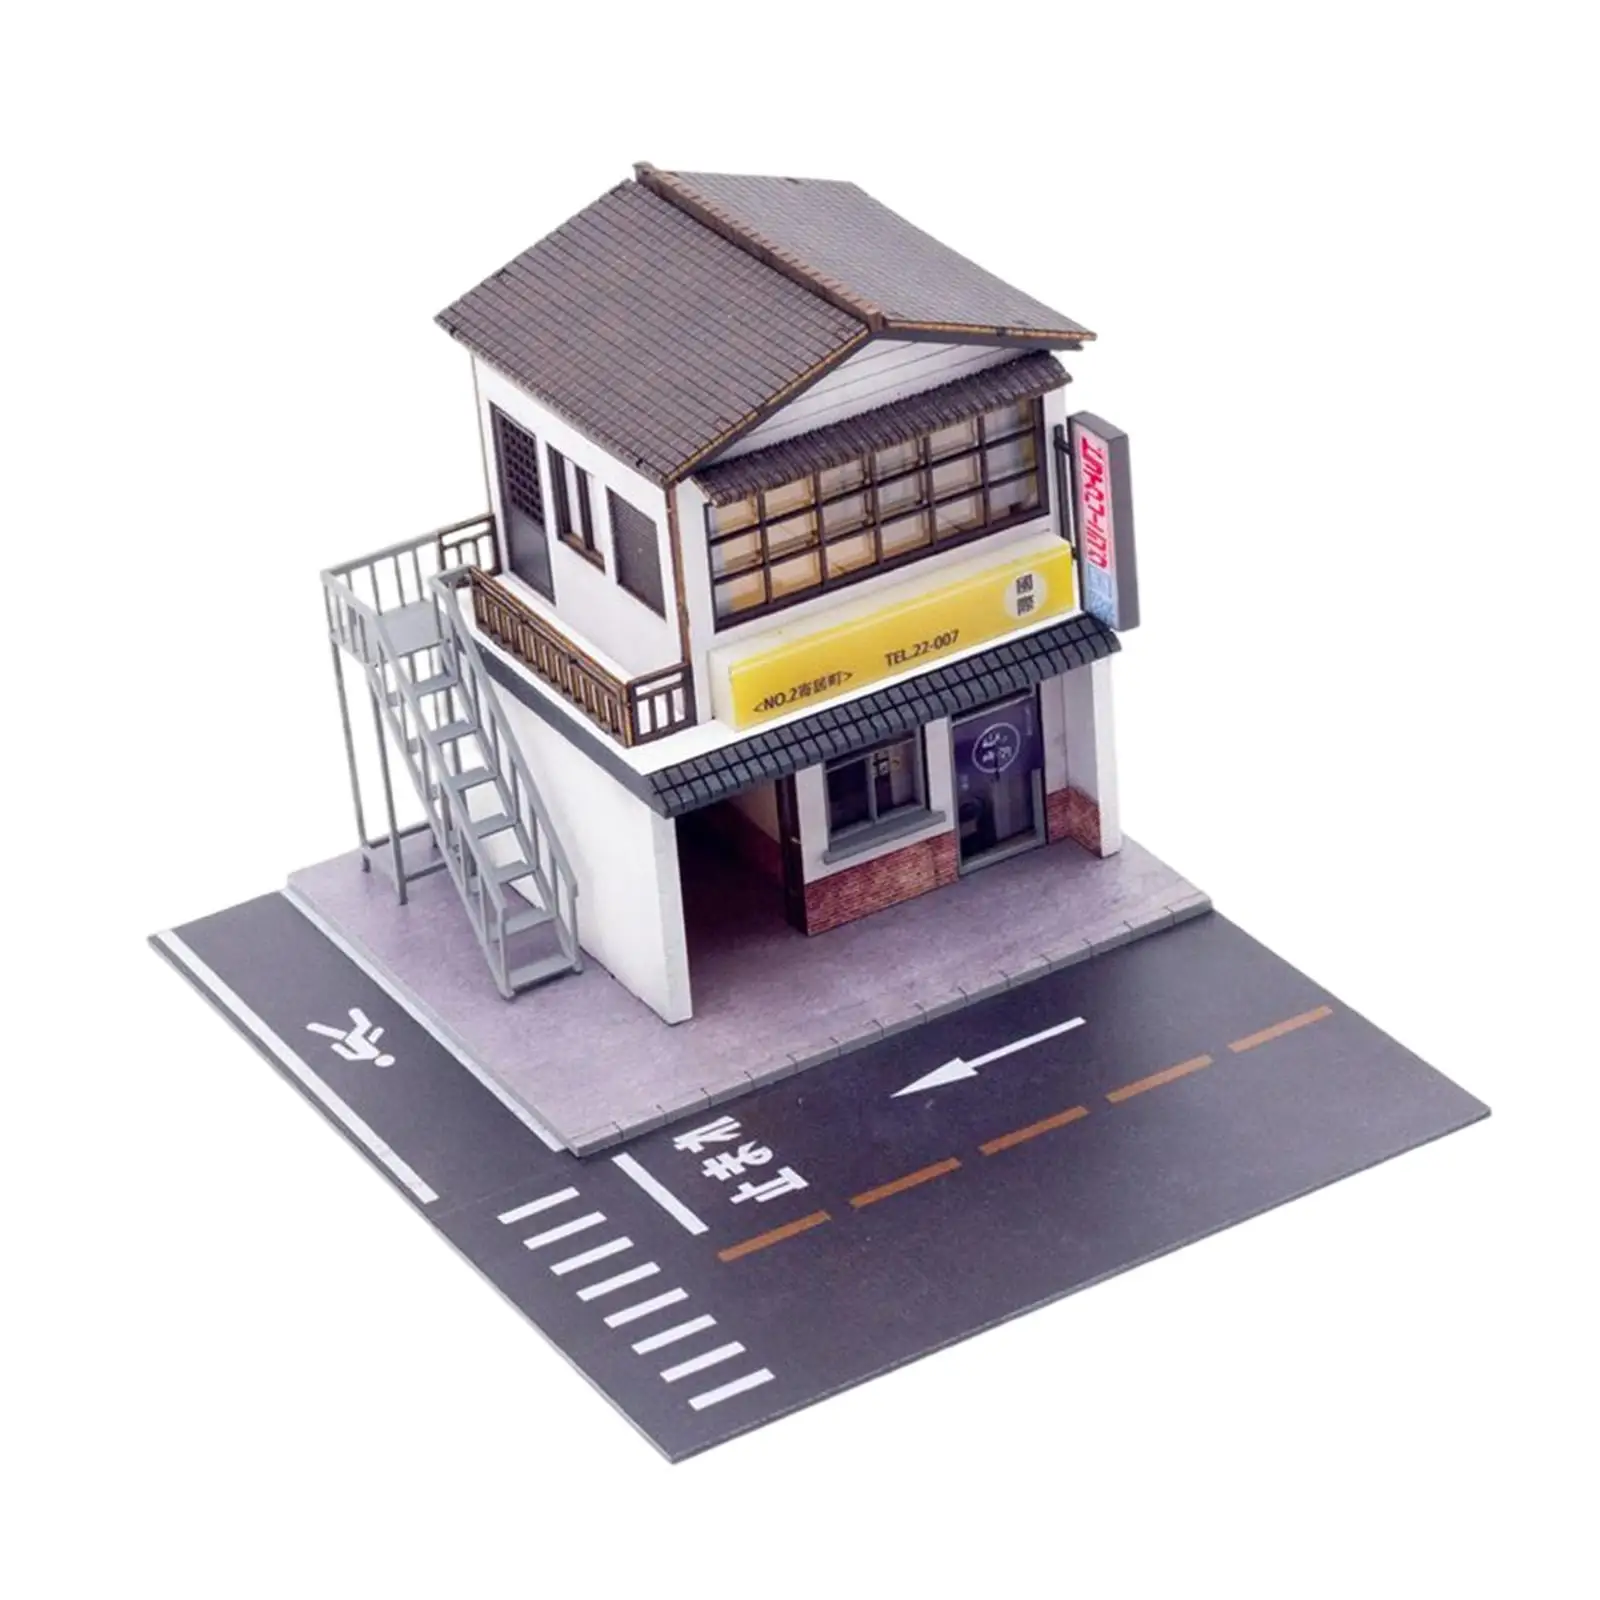 Miniature 1:64 Scale Dry Cleaners Diorama Scenery Collection Gifts Desktop Scene Toy City DIY Model Layout Decoration